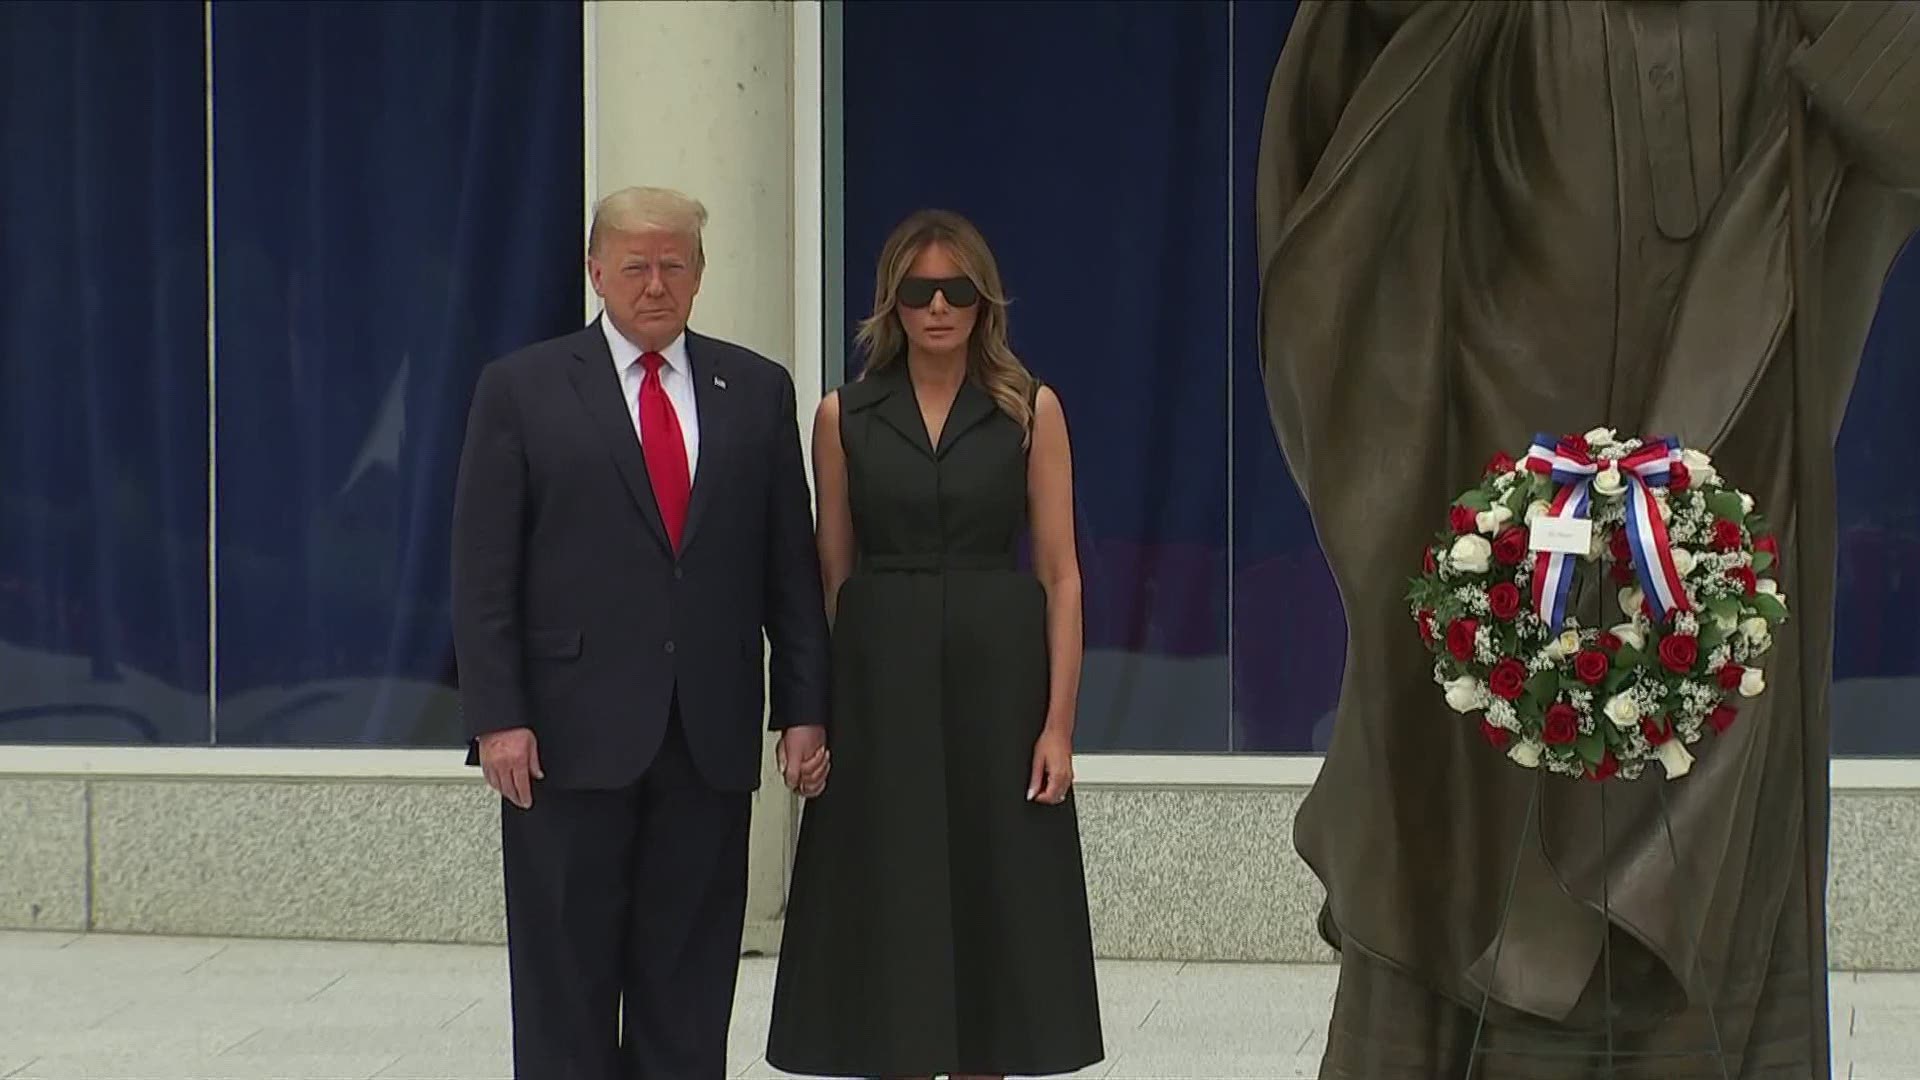 The Trump's placed a wreath at the outdoor statue of Saint John Paul II.